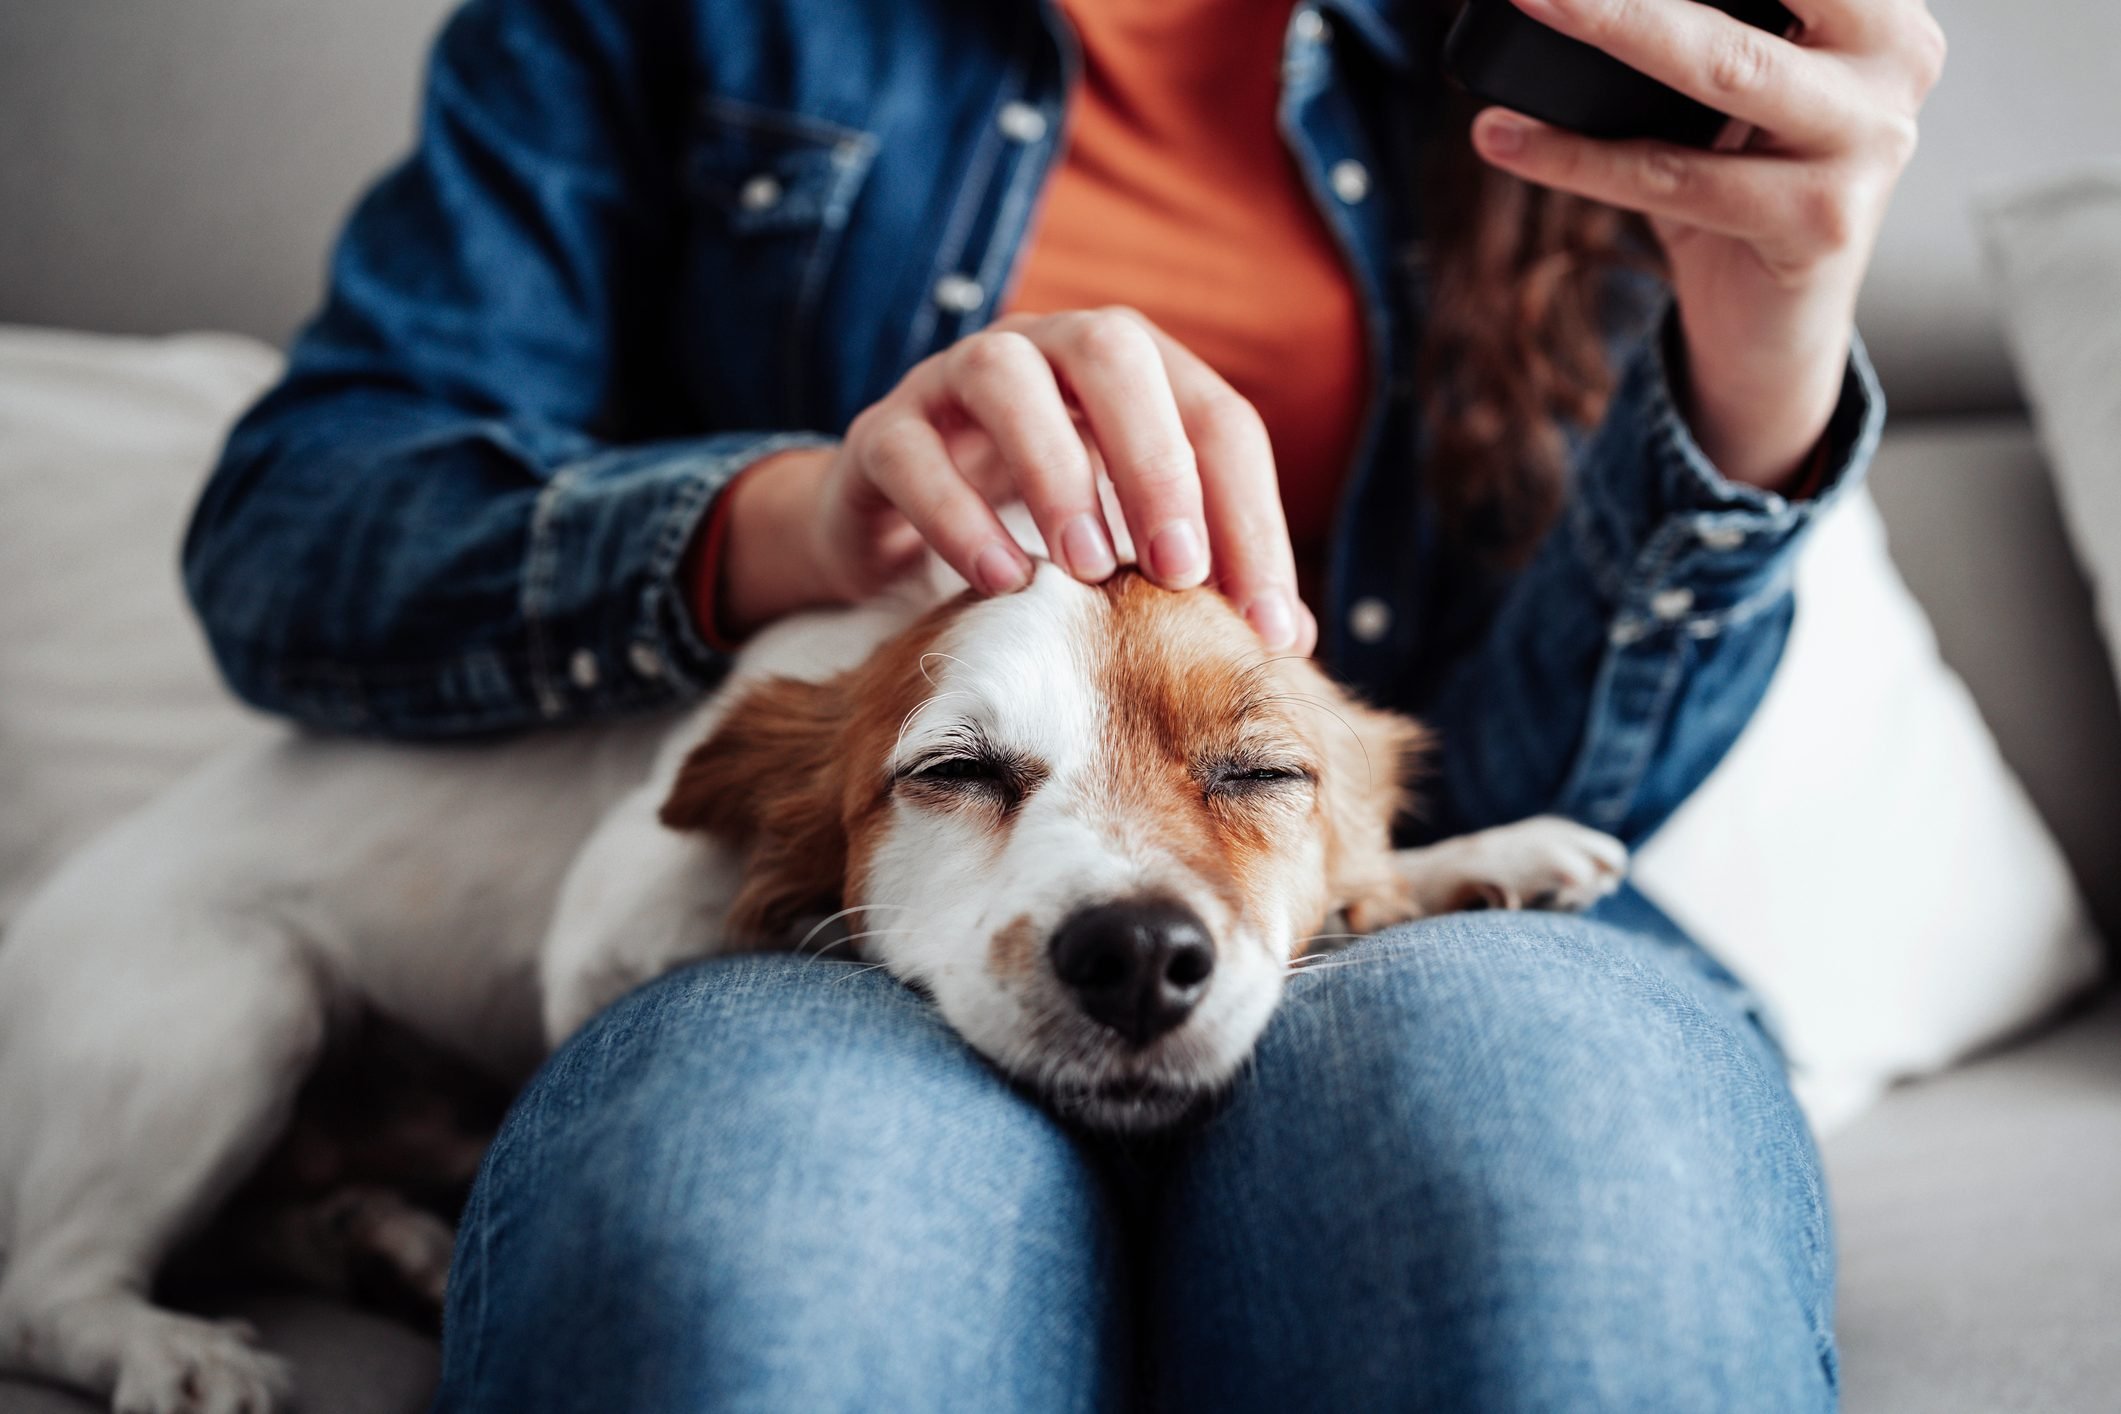 How to Massage Your Dog, According to Certified Dog Massage Therapists [With Instructional Video]